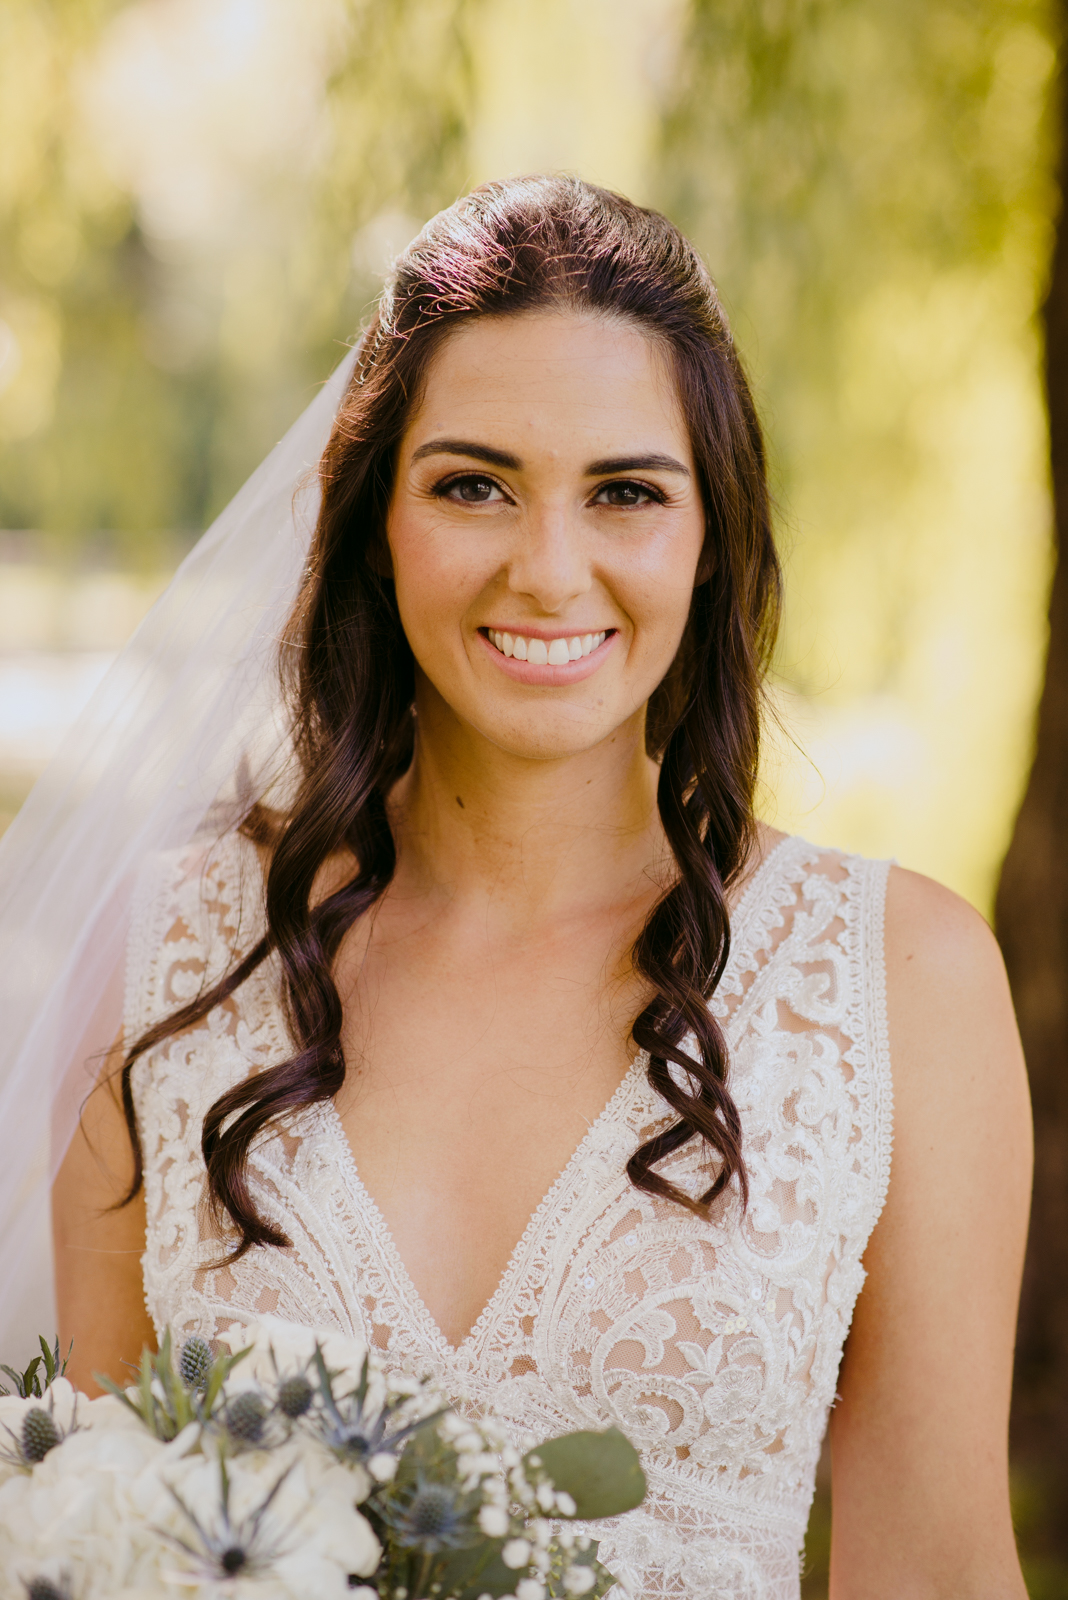 bride smiling at the camera by patterson's creek